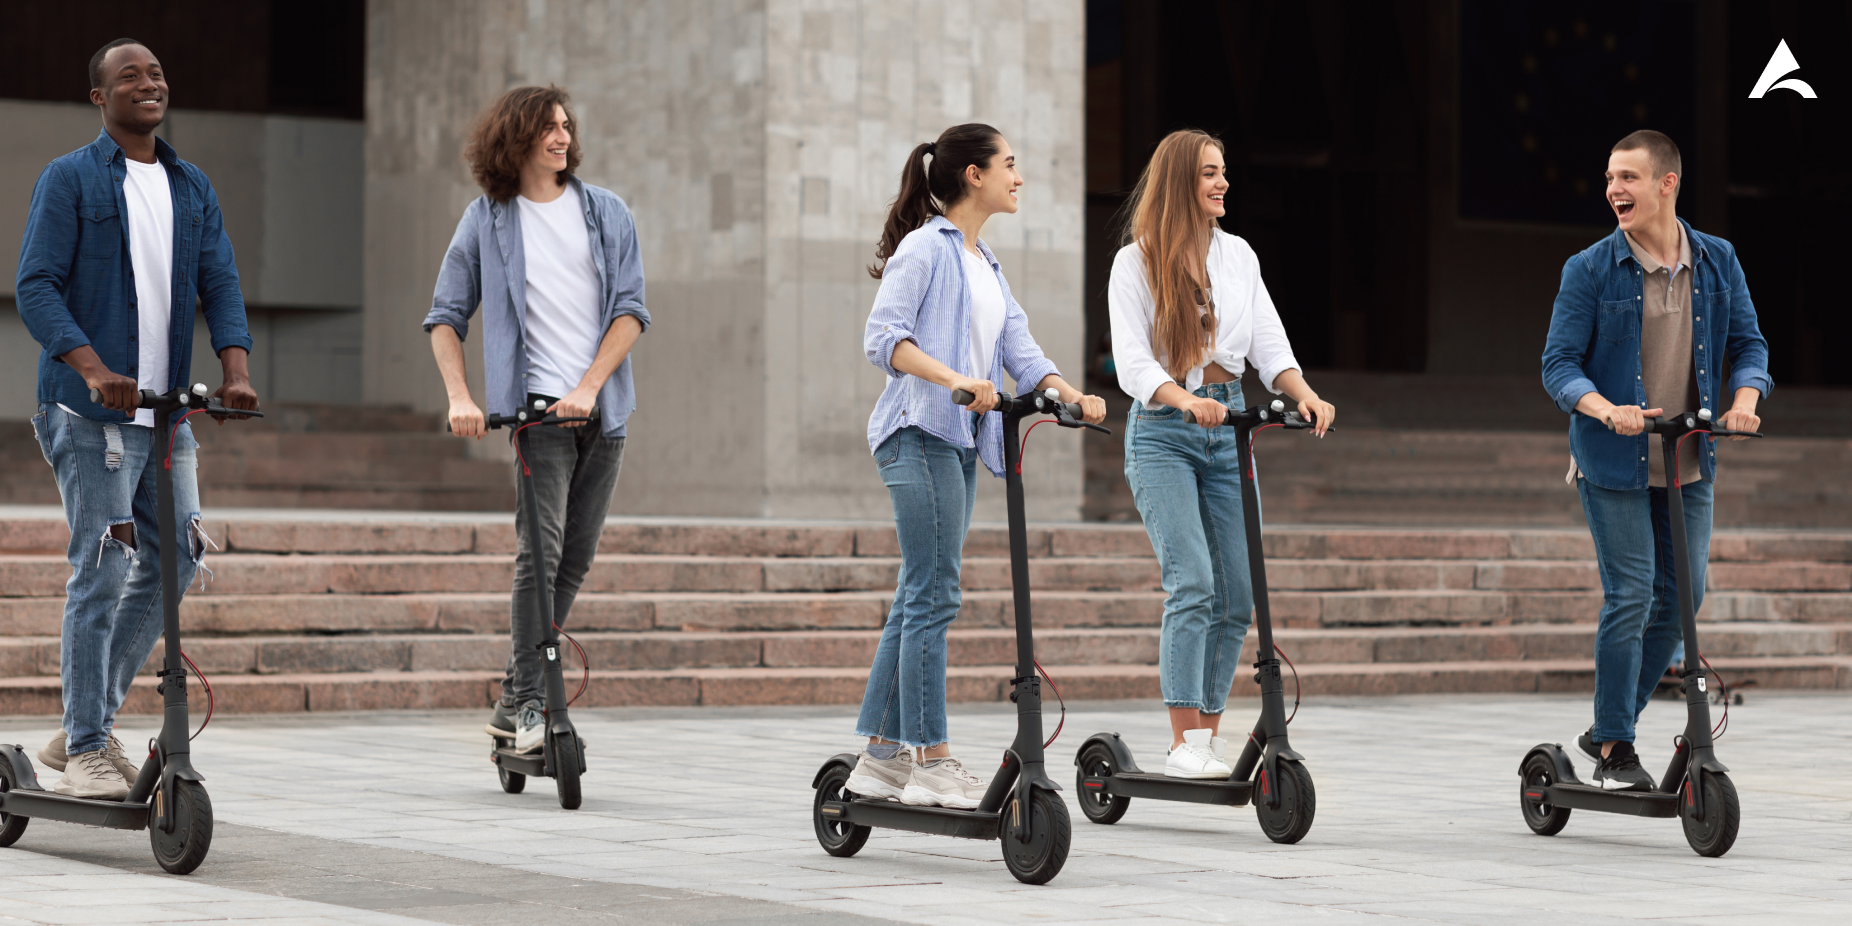 People on electric scooters